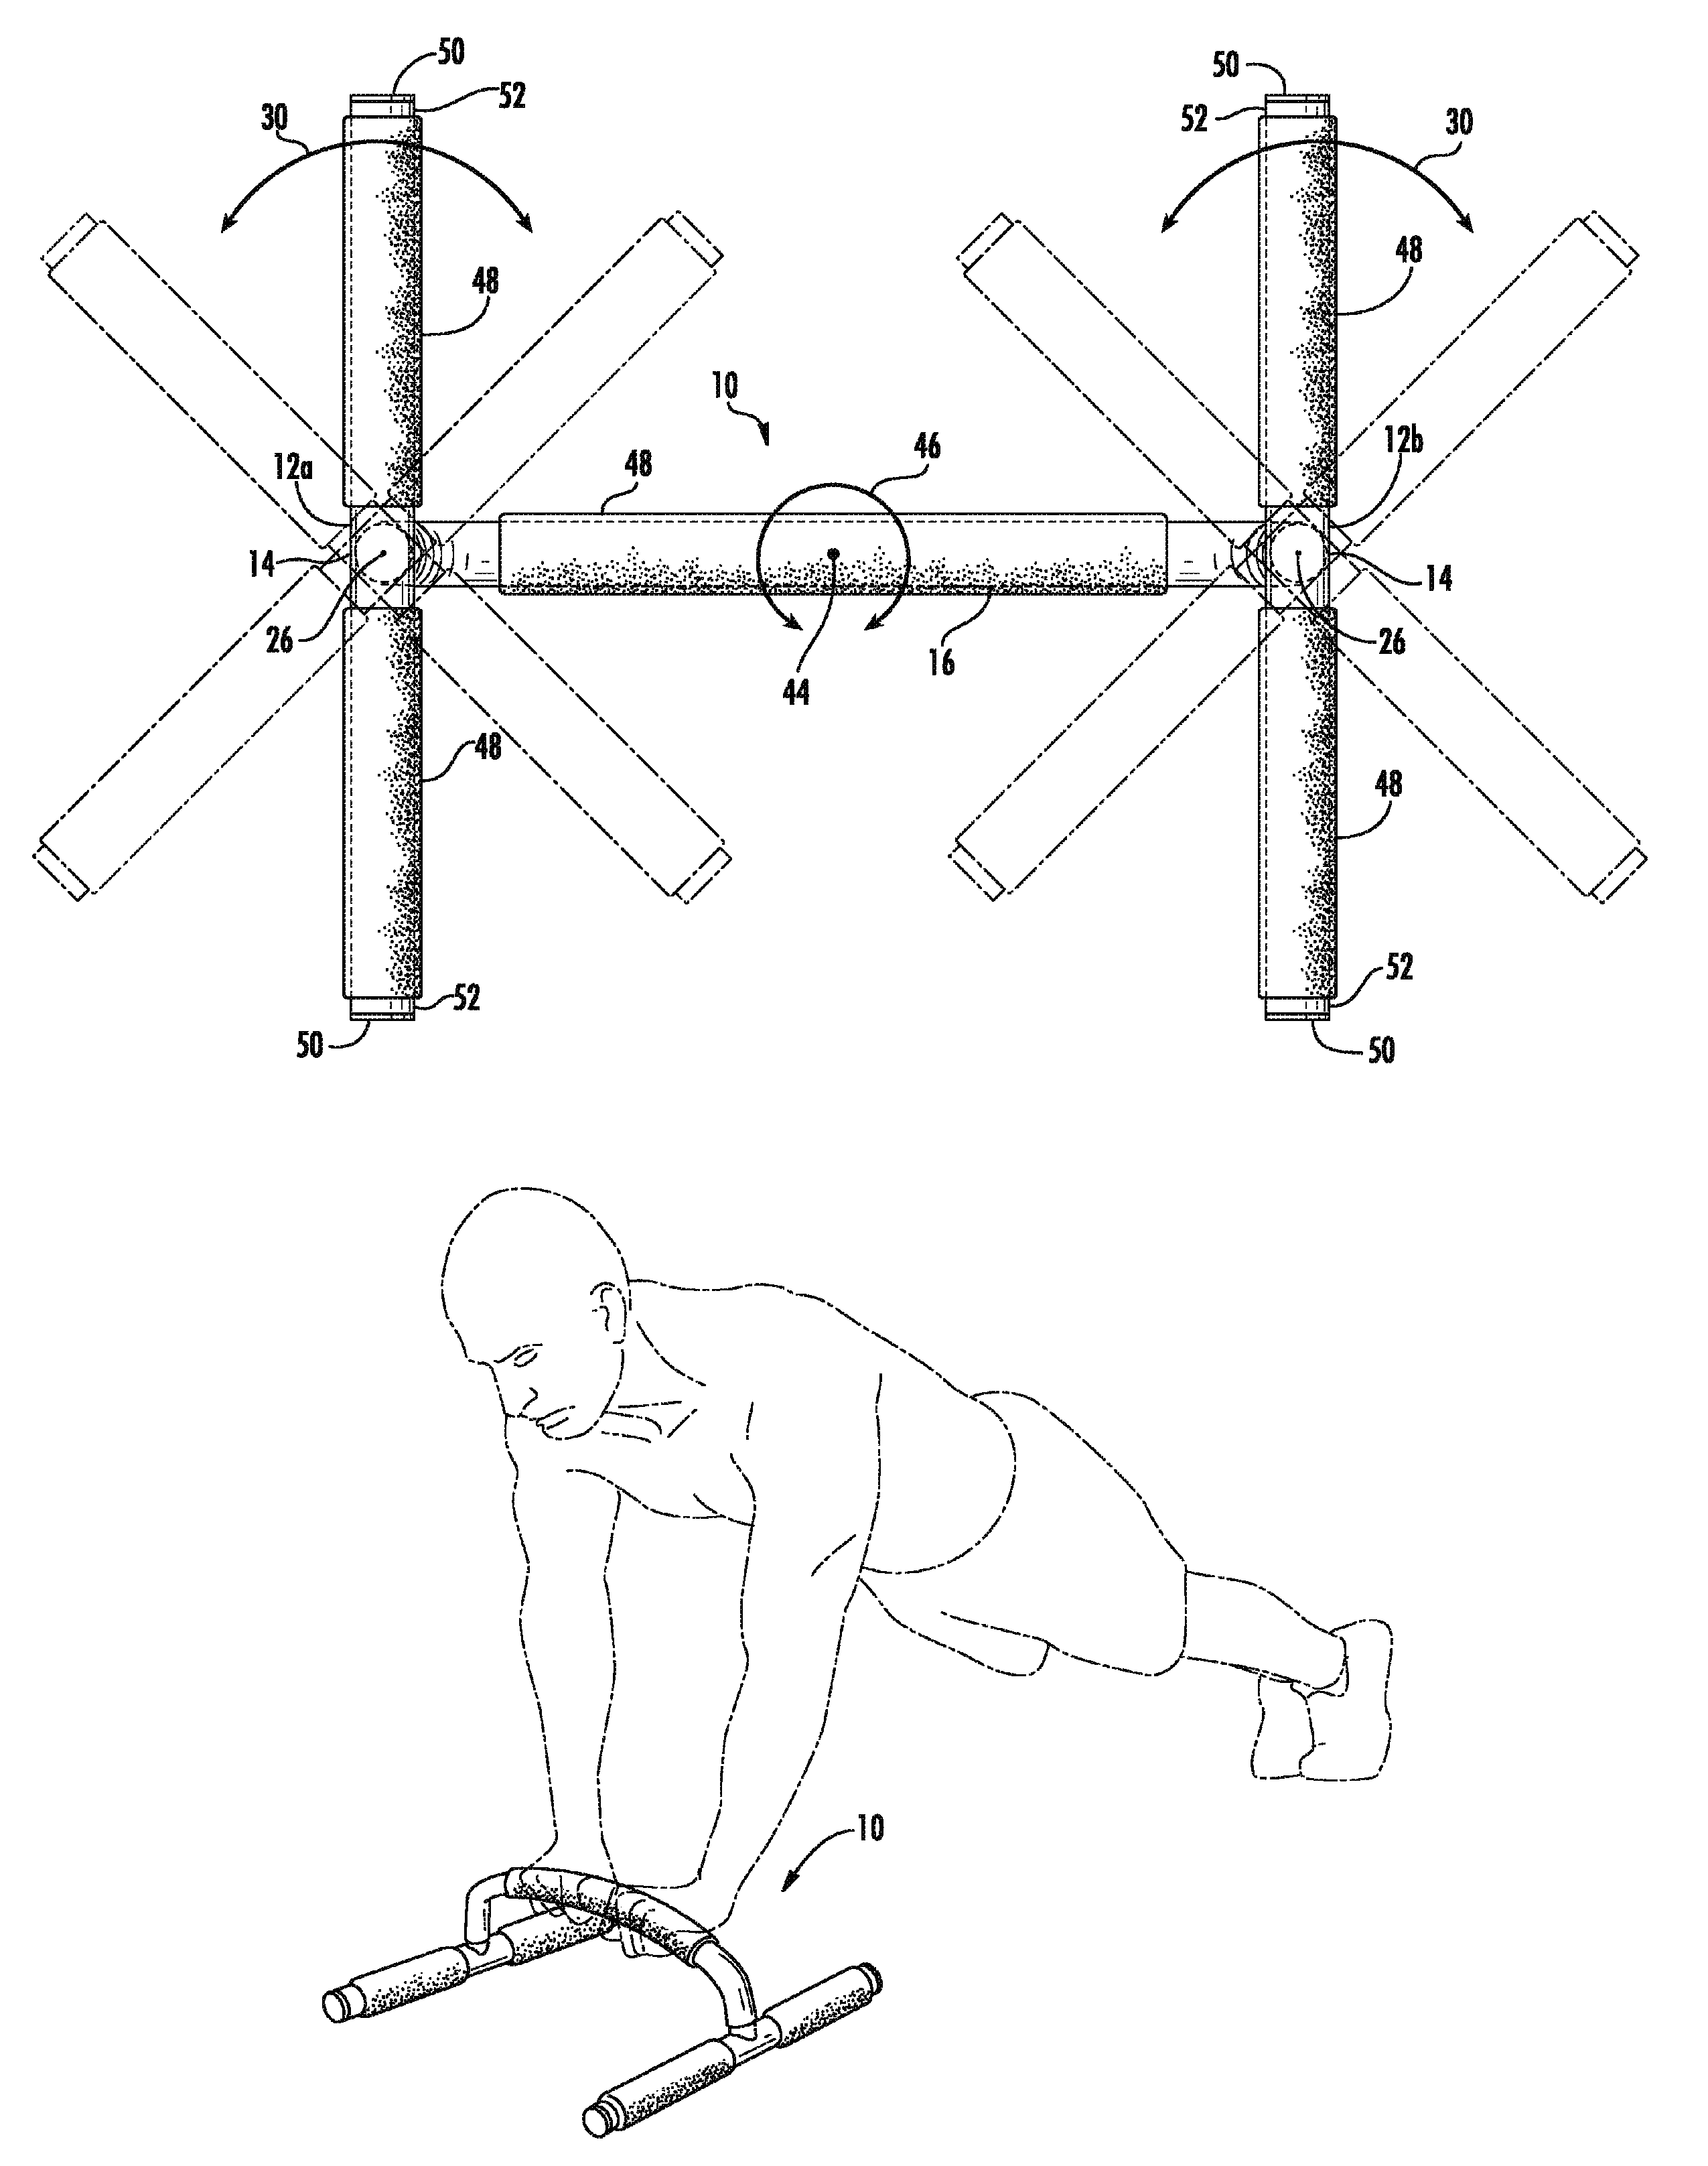 Core-strengthening exercise apparatus